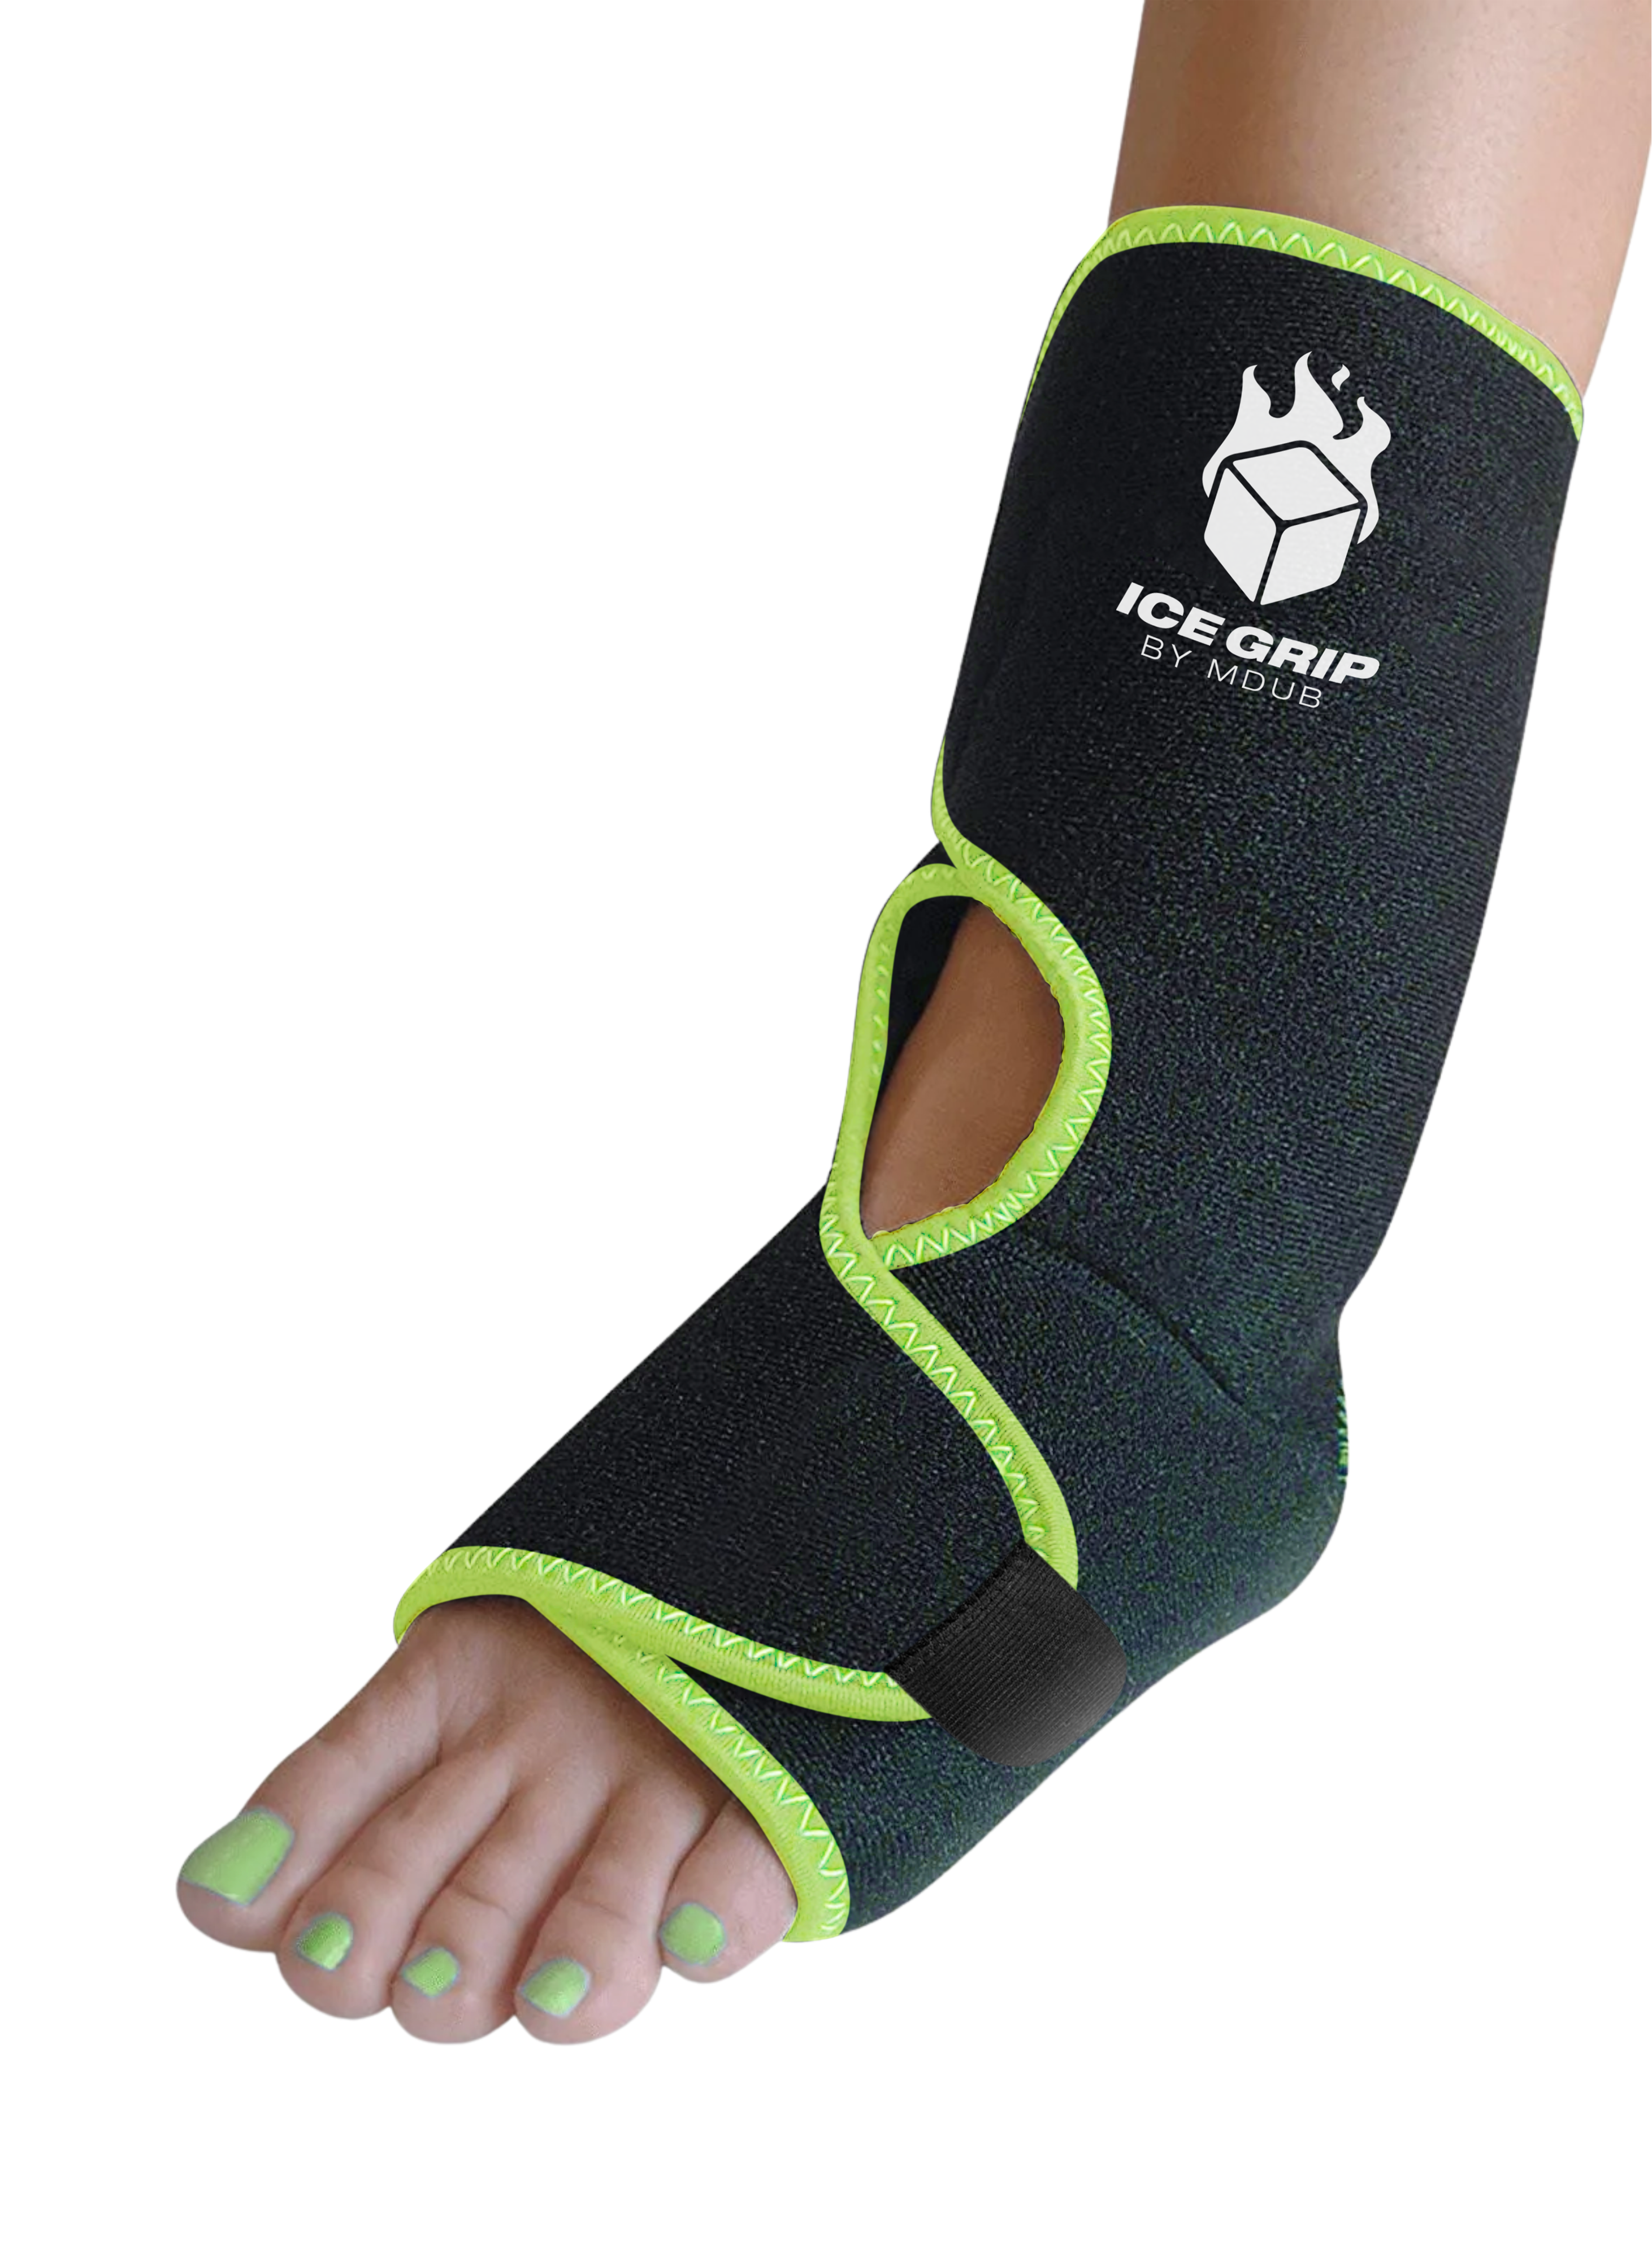 Ice Grip - Foot & Ankle Wrap, Foot Brace, Ankle Brace, Ankle Support